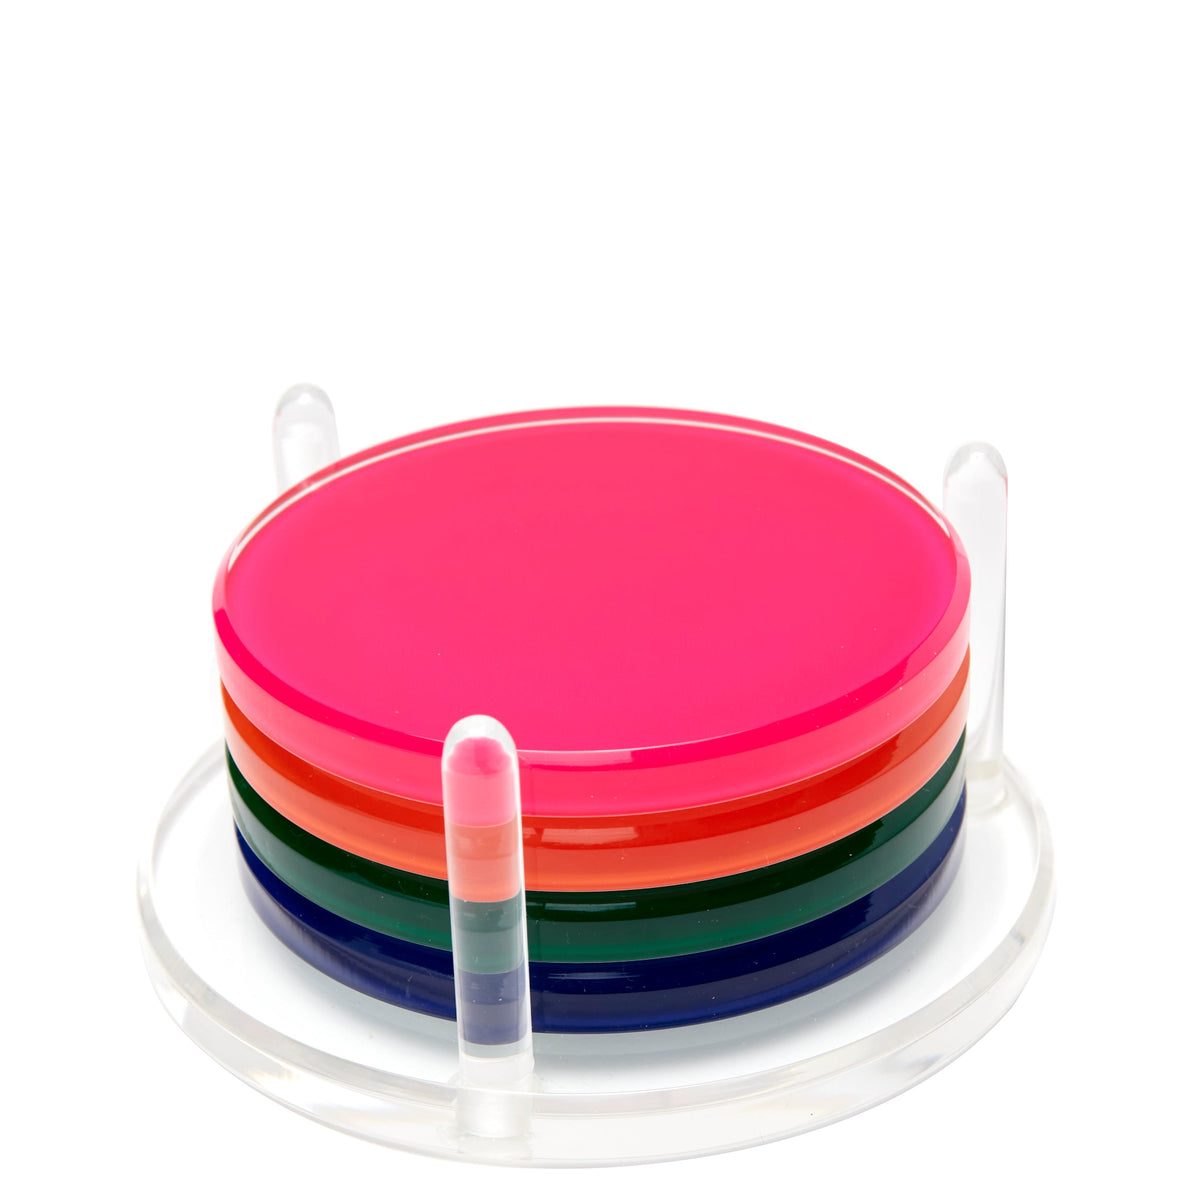 Drink COASTERS MULTI COLOR 4.25 inches by 4.25 inches